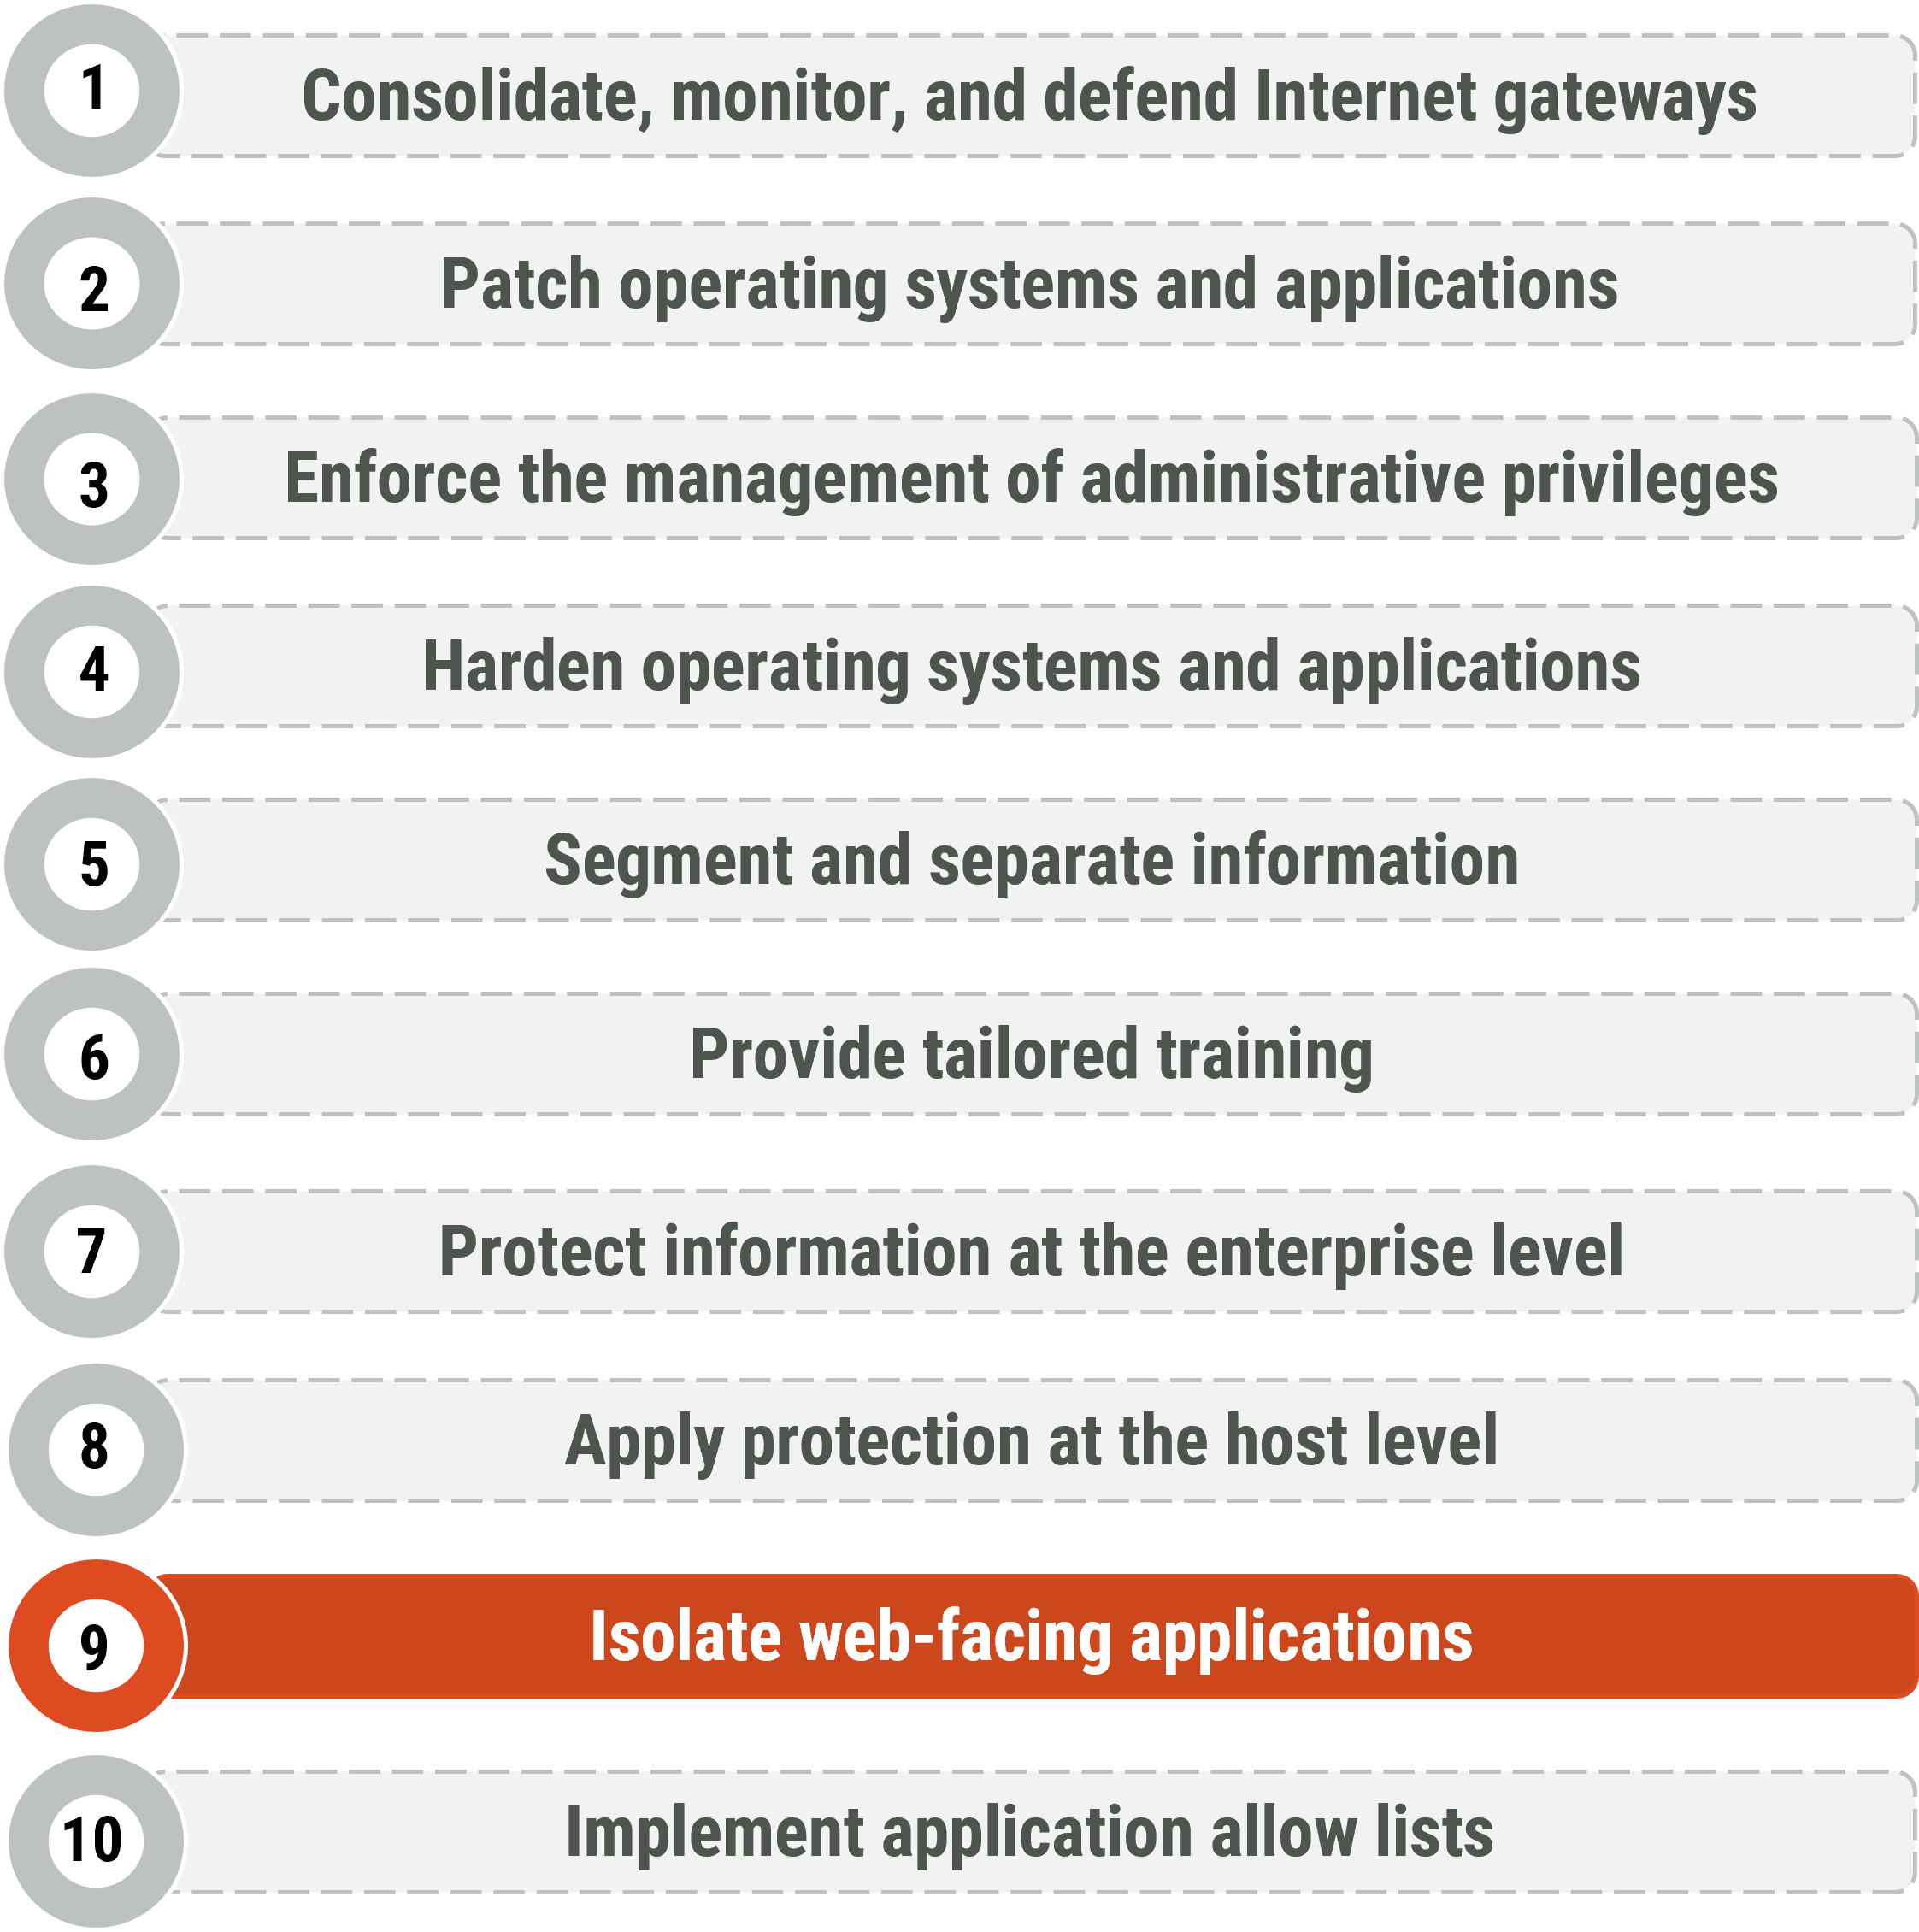 Figure 1: Top 10 IT security actions - No. 9 isolate web-facing applications - Long description immediately follows